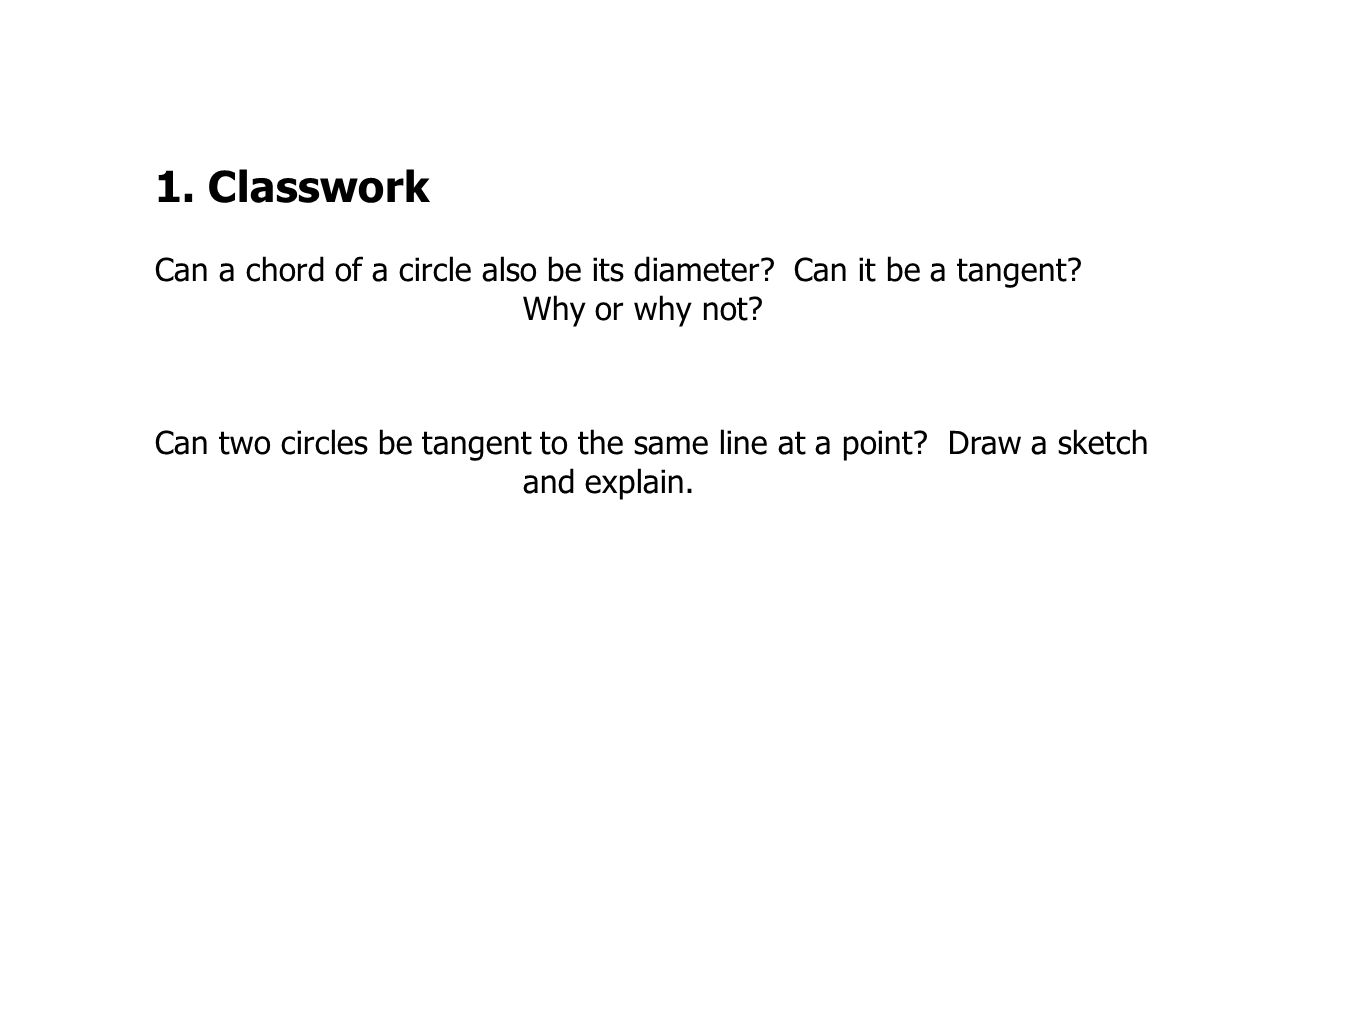 1. Classwork Can a chord of a circle also be its diameter Can it be a tangent Why or why not